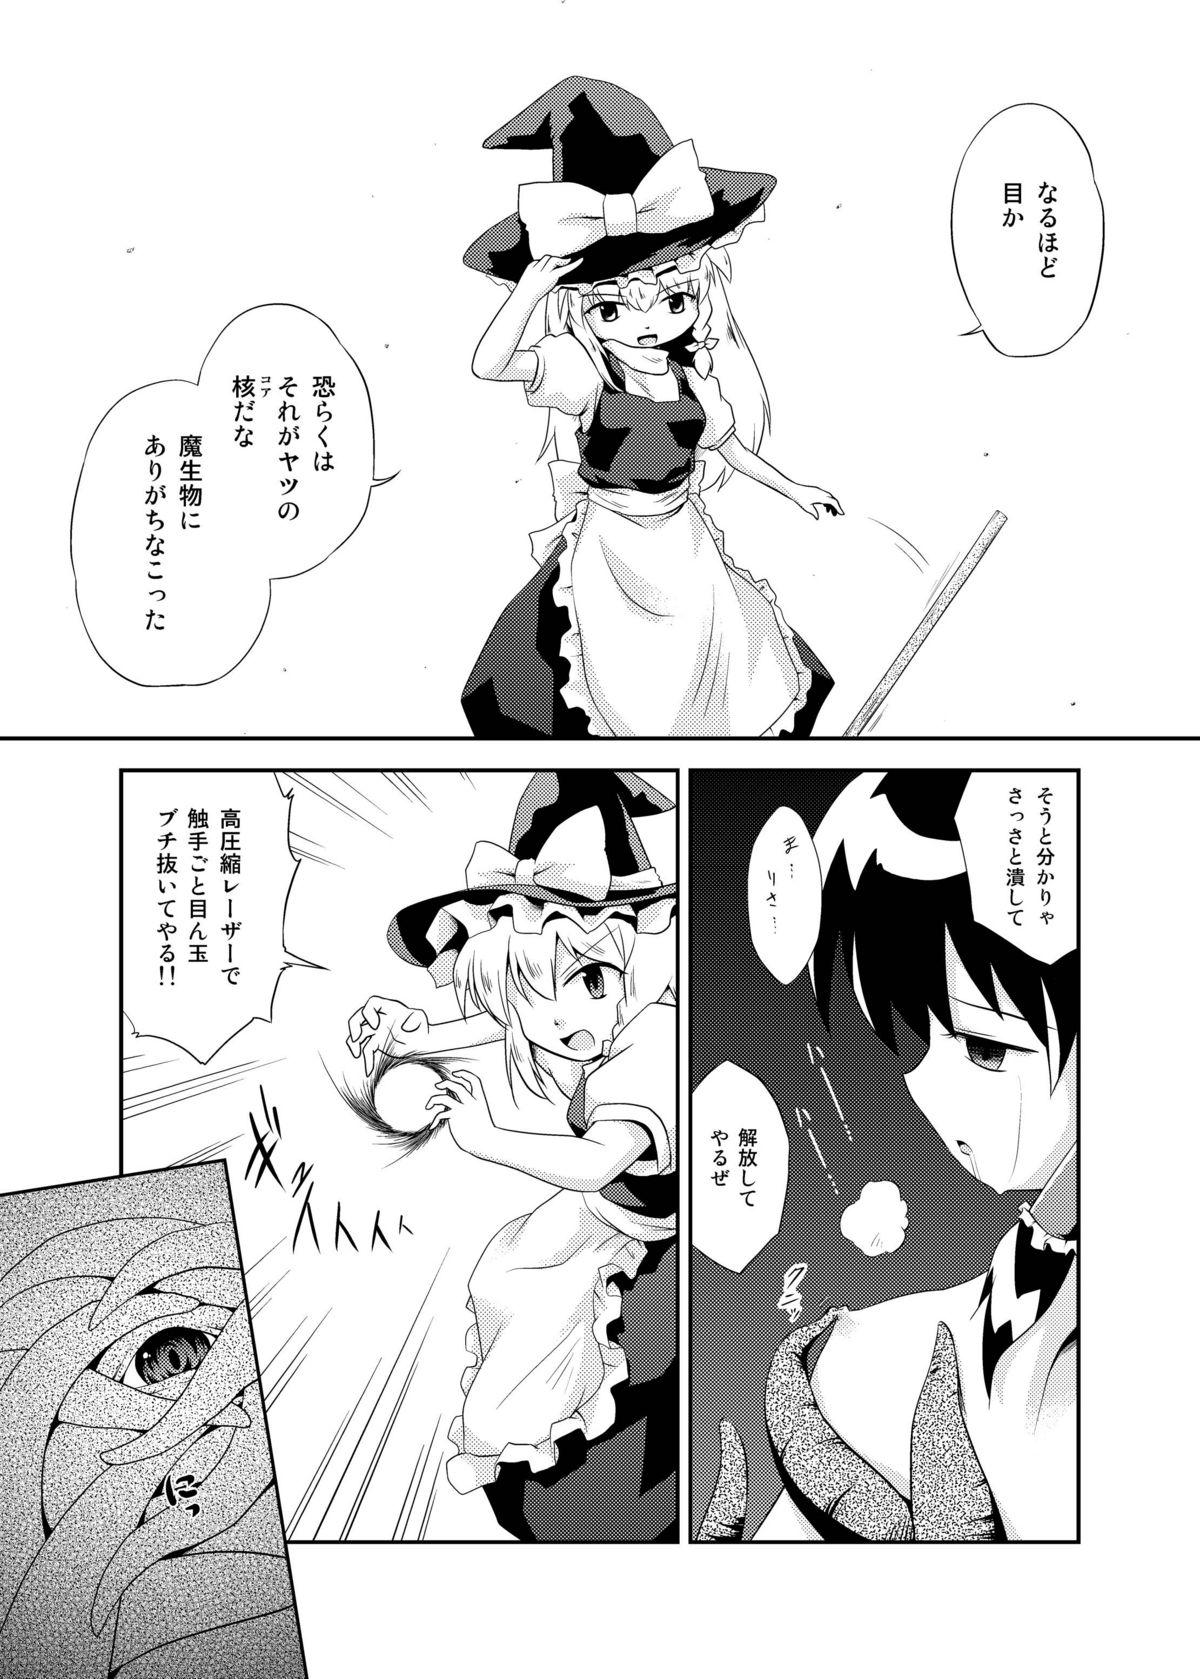 One DISARM CLOTHES - Touhou project Uniform - Page 6